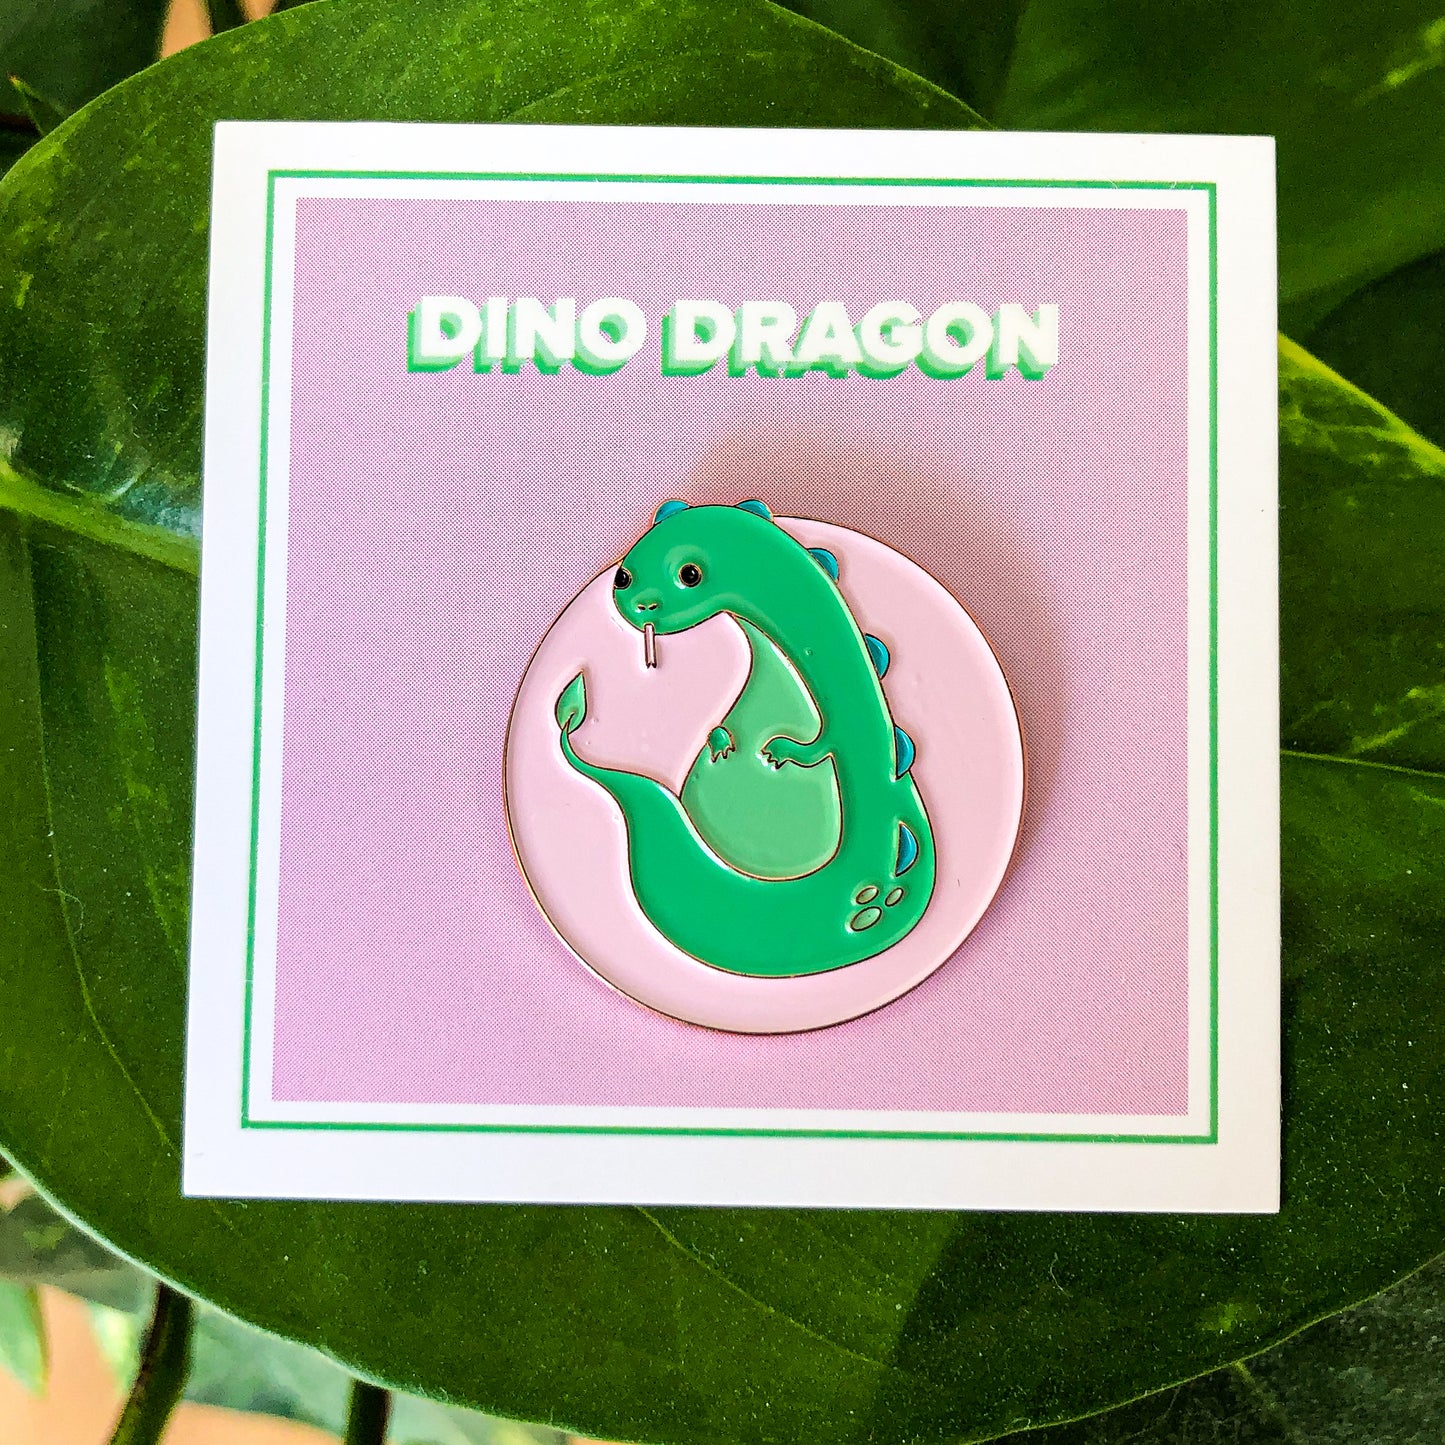 Green Dragon Soft Enamel Pin on Pink Backing Card with "DINO DRAGON" Text